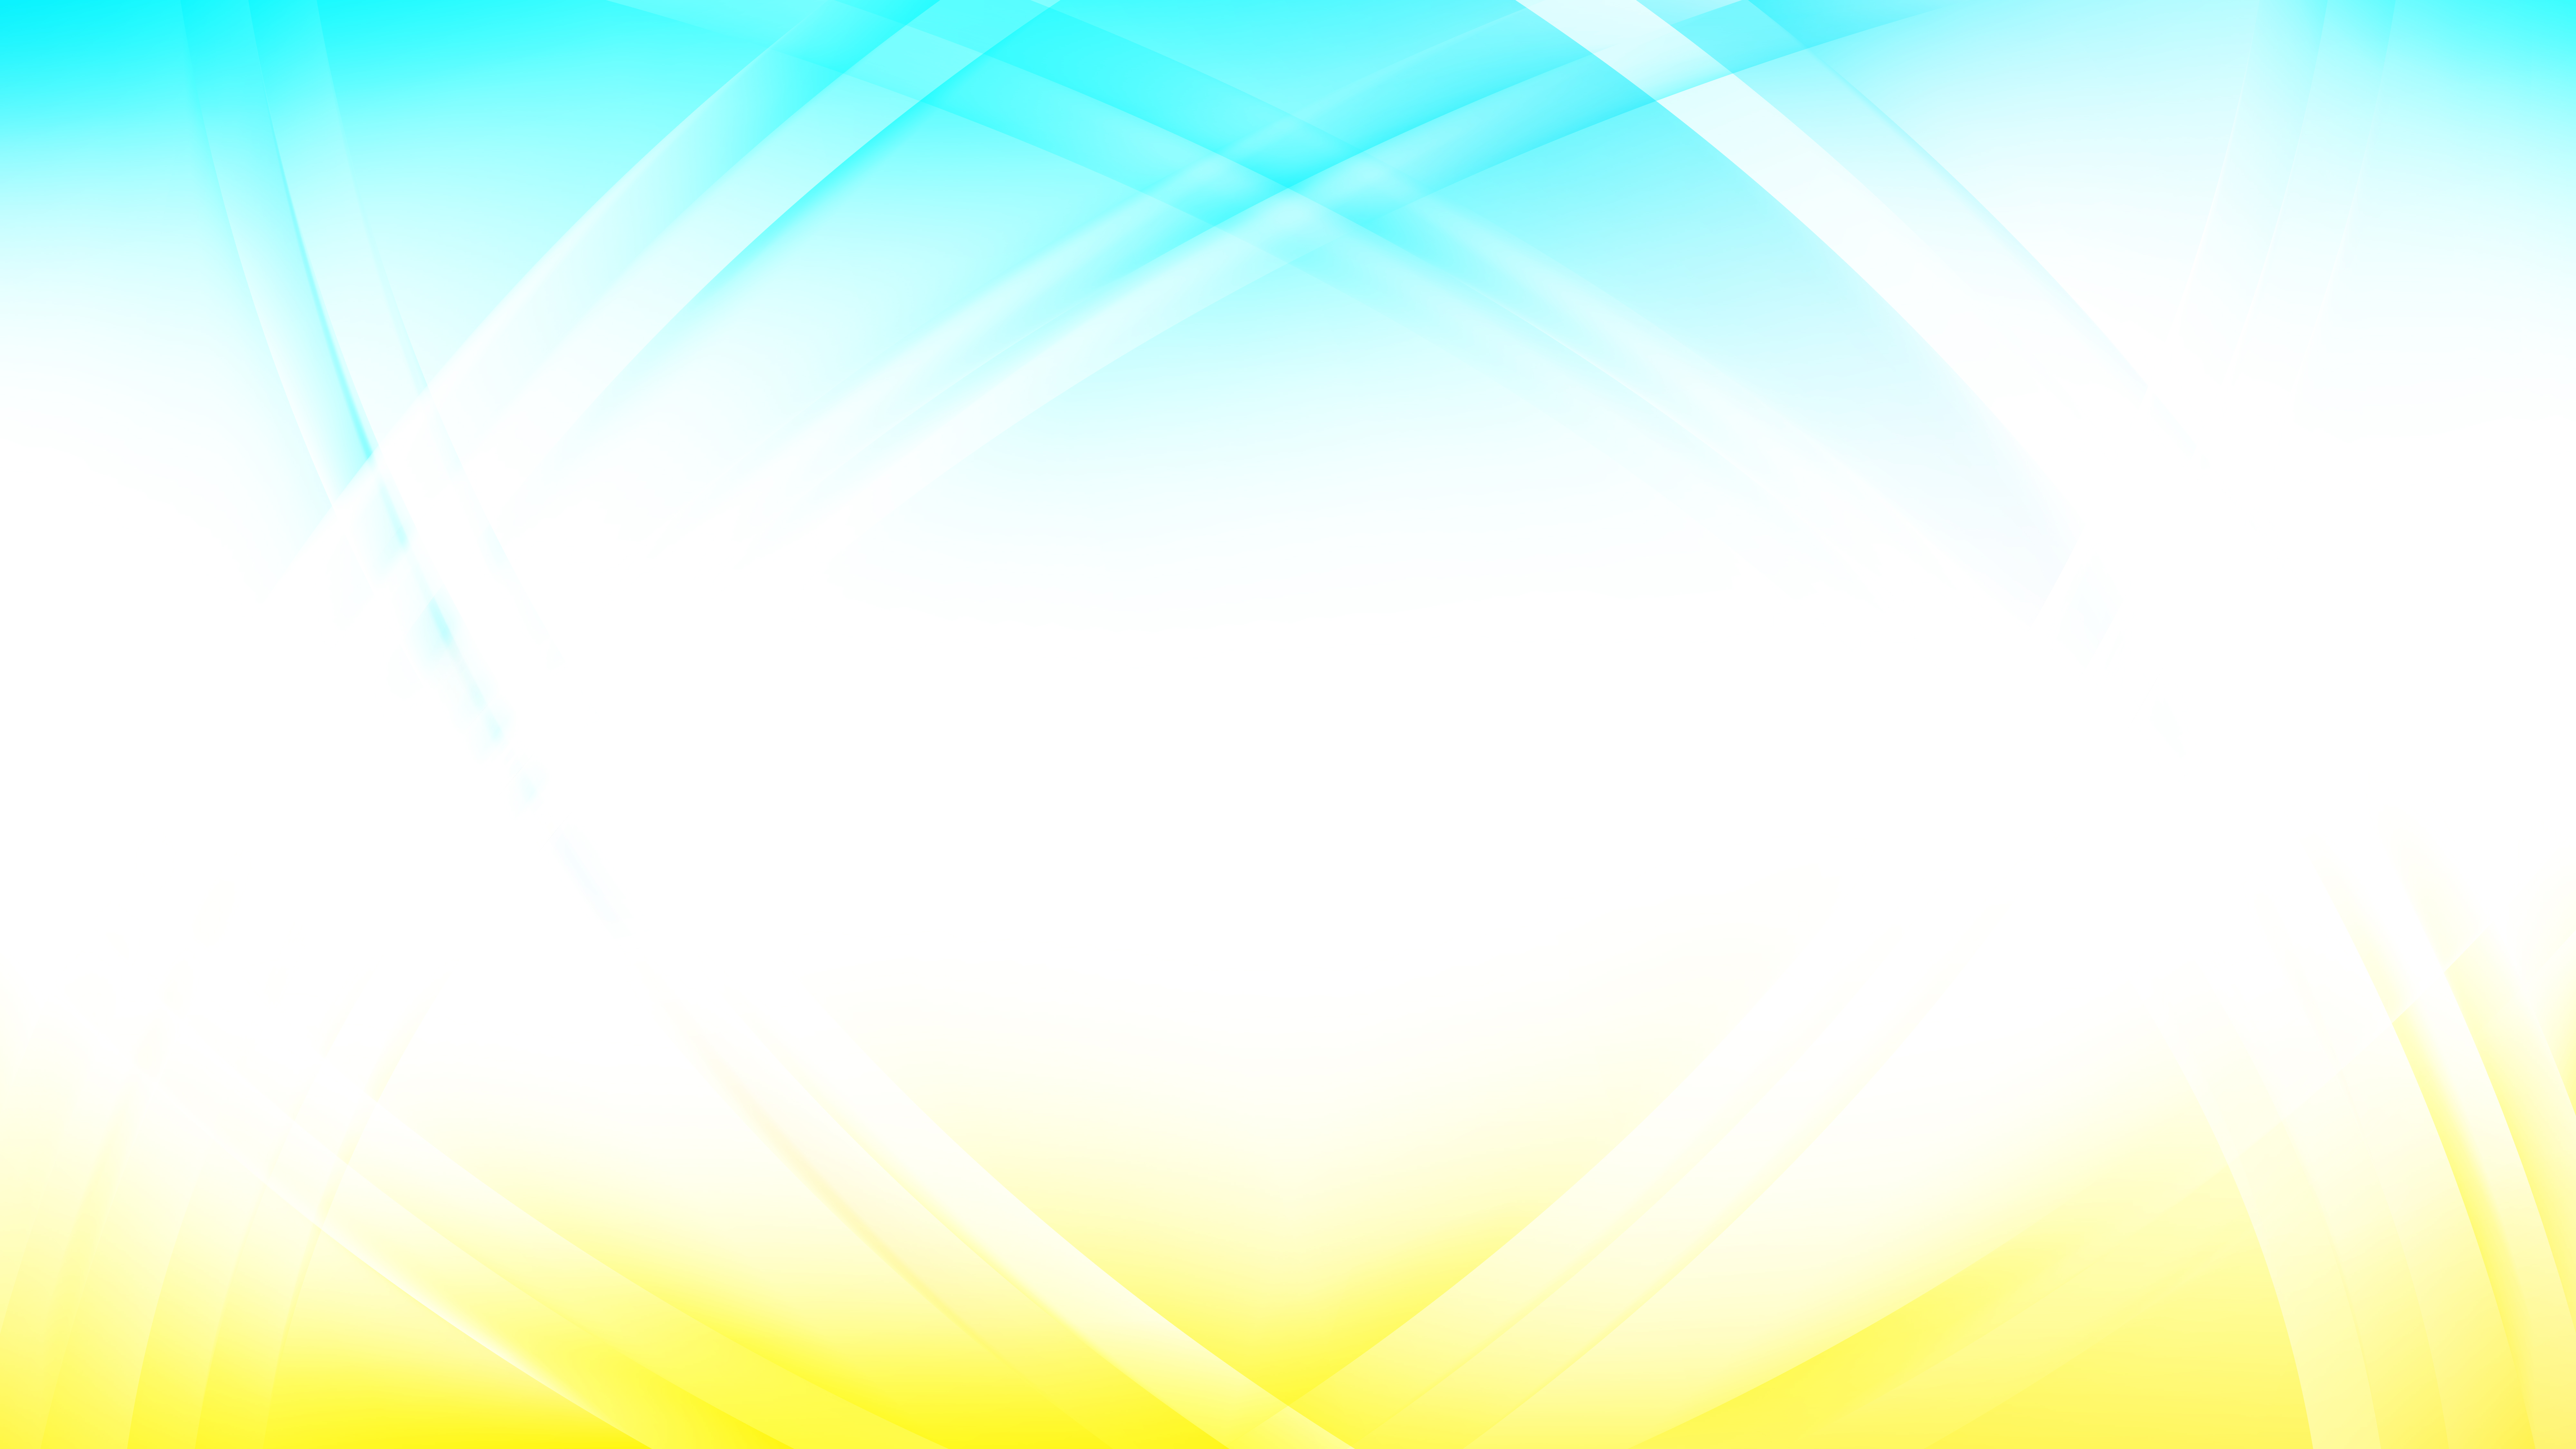 Blue And Yellow Waves Curved Lines Background Vector Illustration